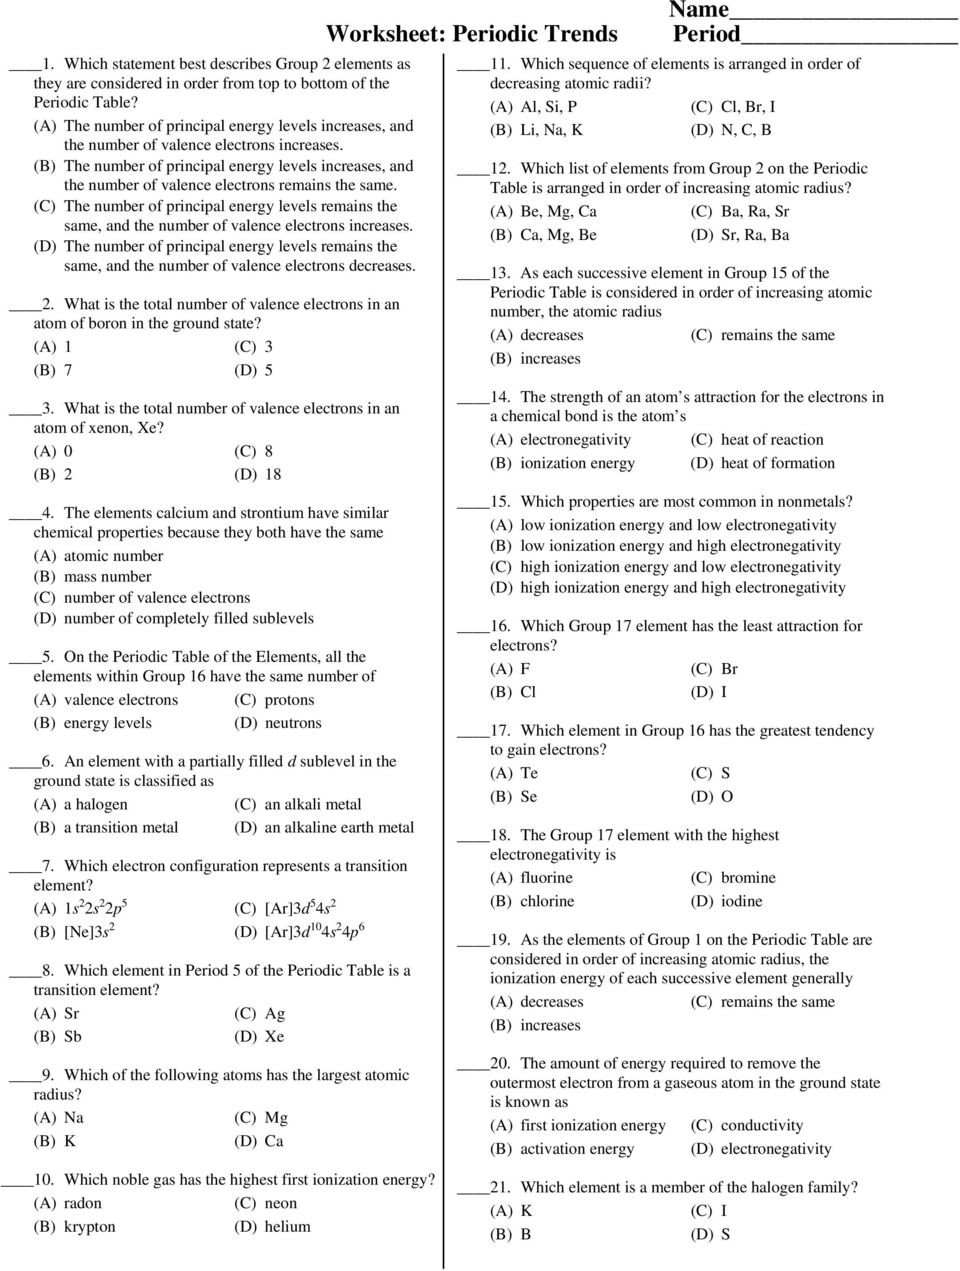 Periodic Trends Worksheet Answers Name Worksheet Periodic Trends 11 which Sequence Of